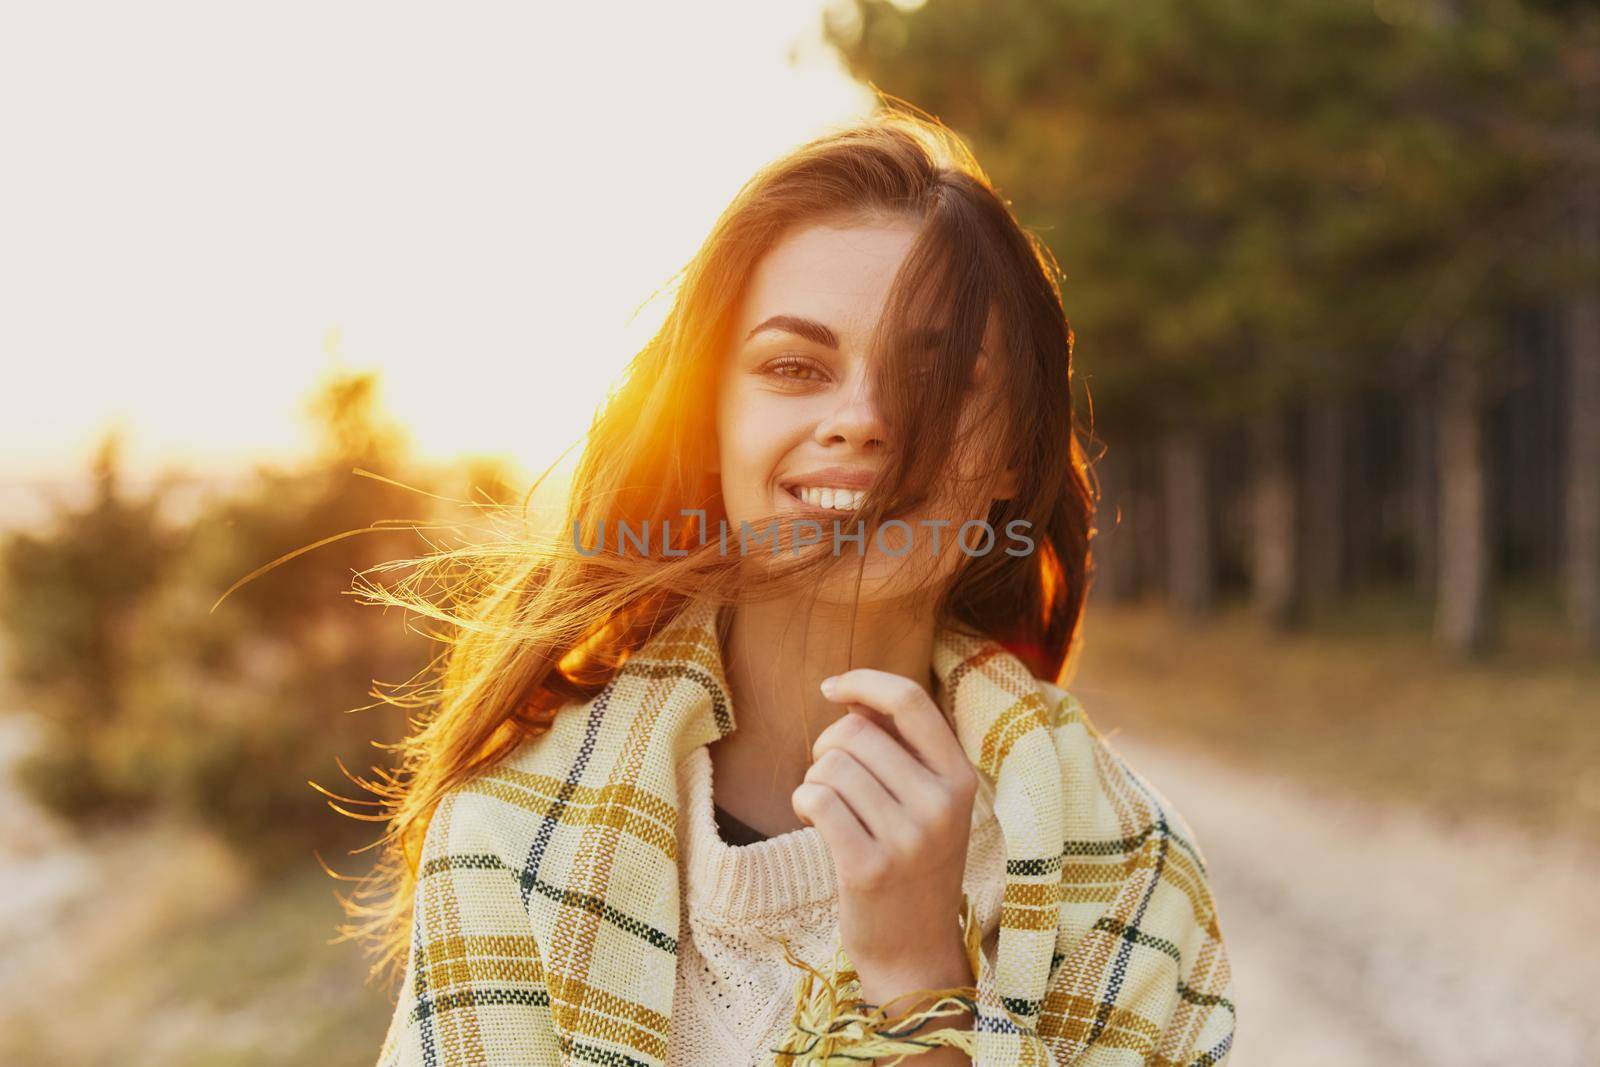 Happy woman in nature near coniferous trees and bright sunlight in the background by SHOTPRIME